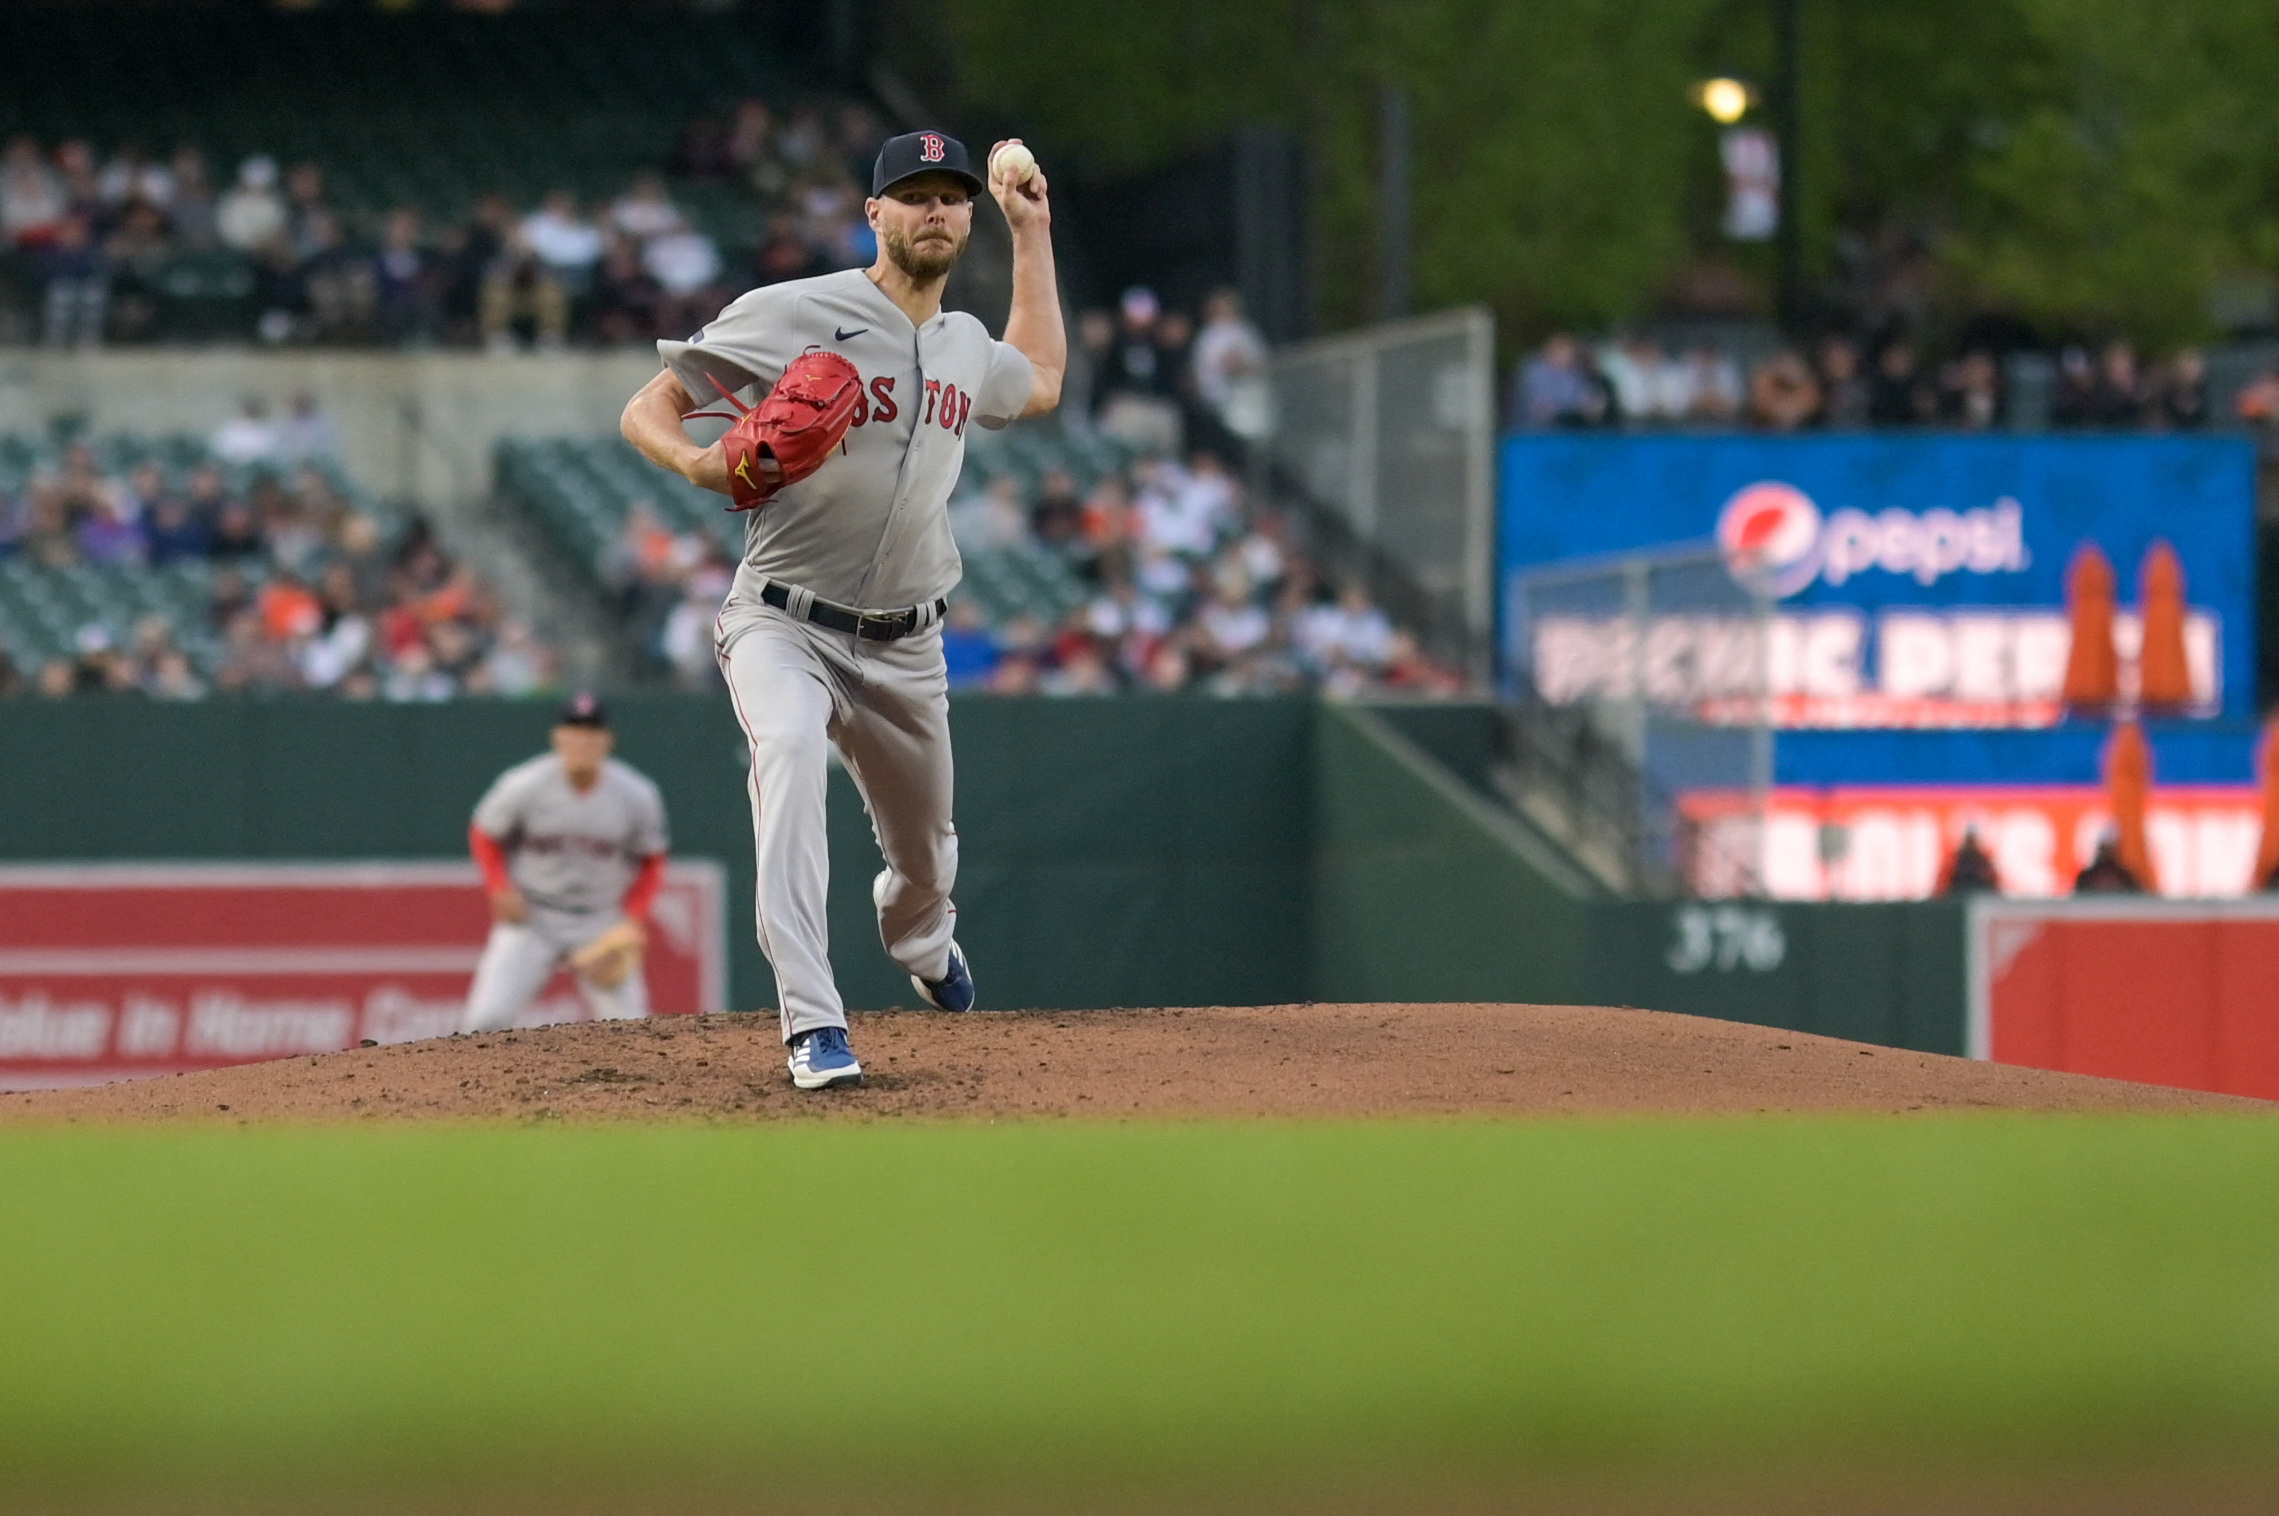 O's edge Red Sox for 7th straight win